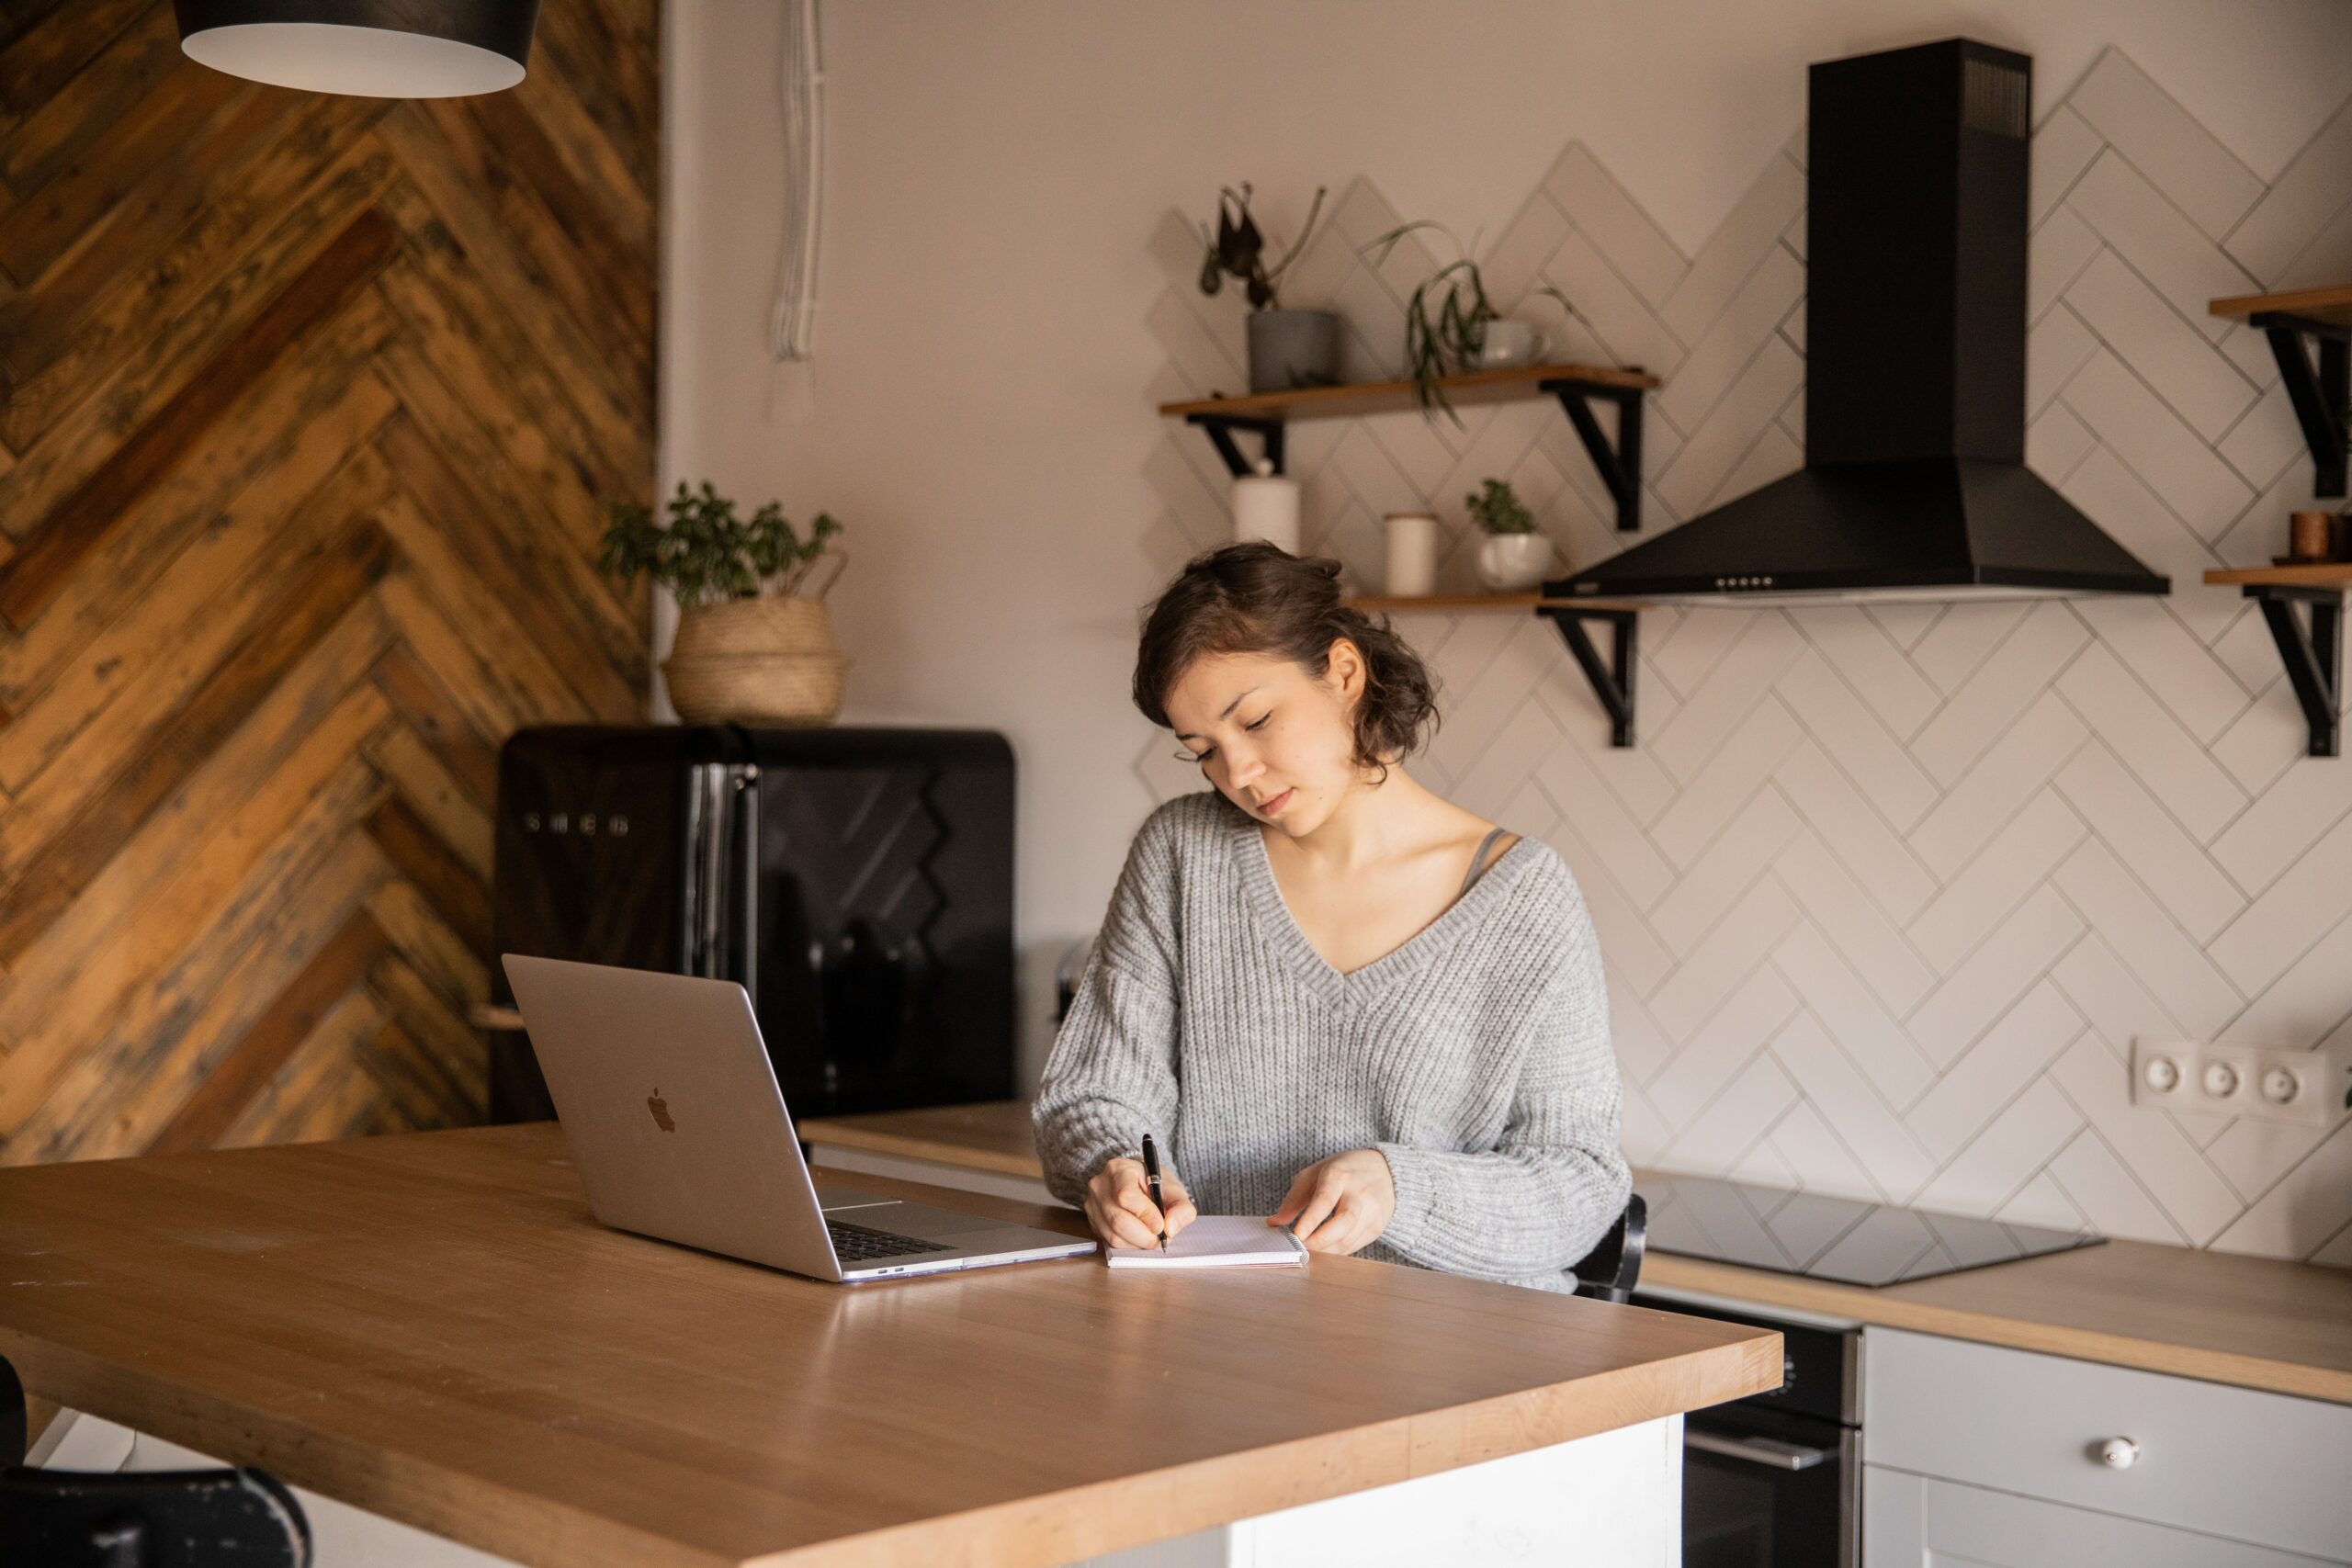 Women at desk scheduling social media content in grey sweater